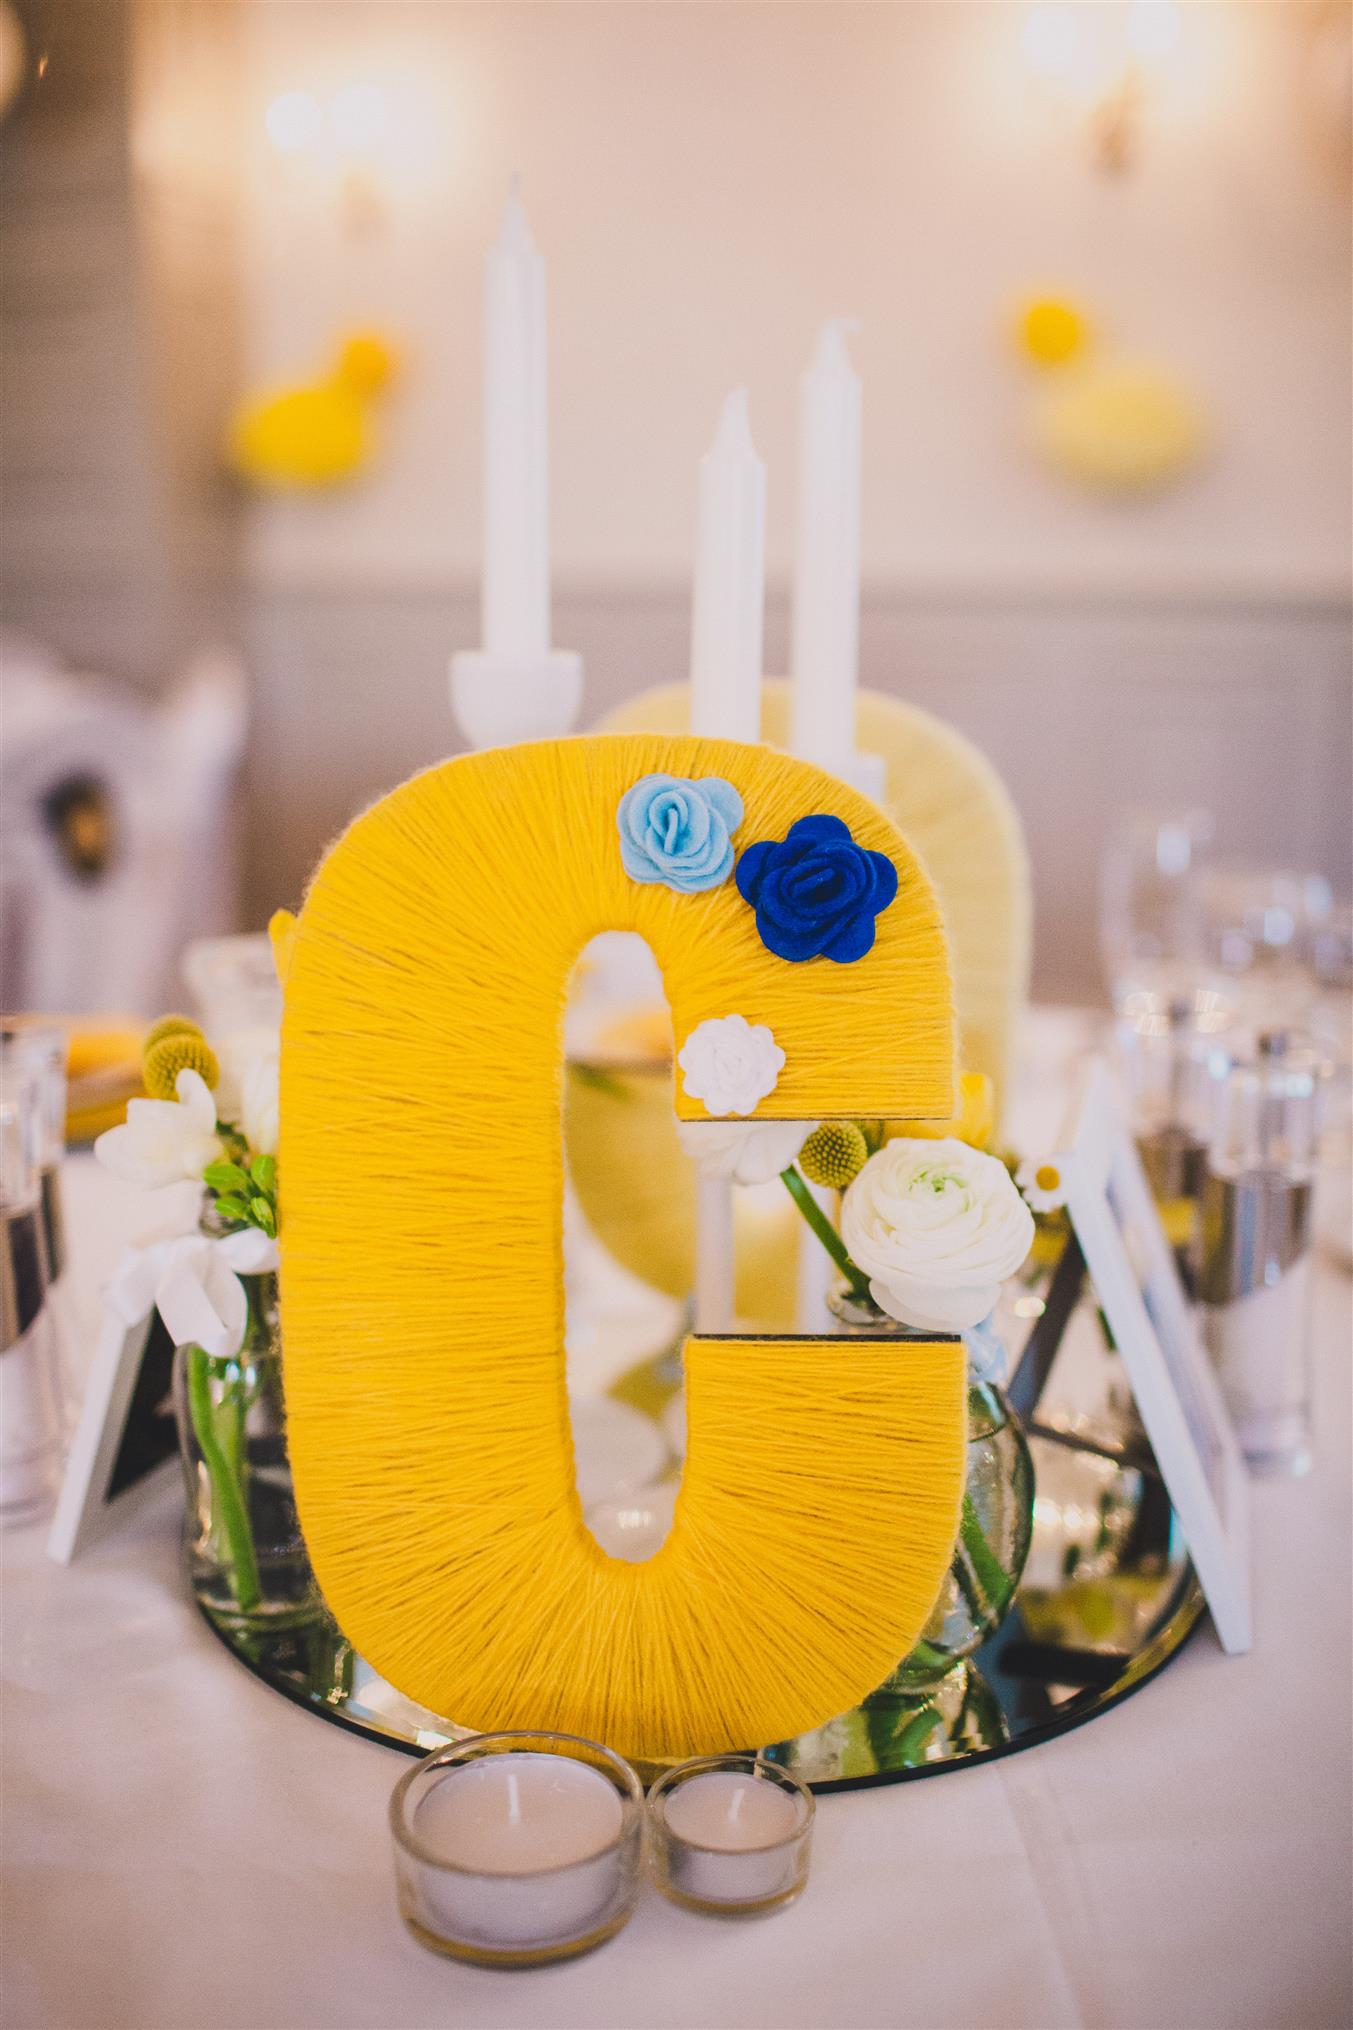 Table Letters - A Spring 1960s Inspired Wedding